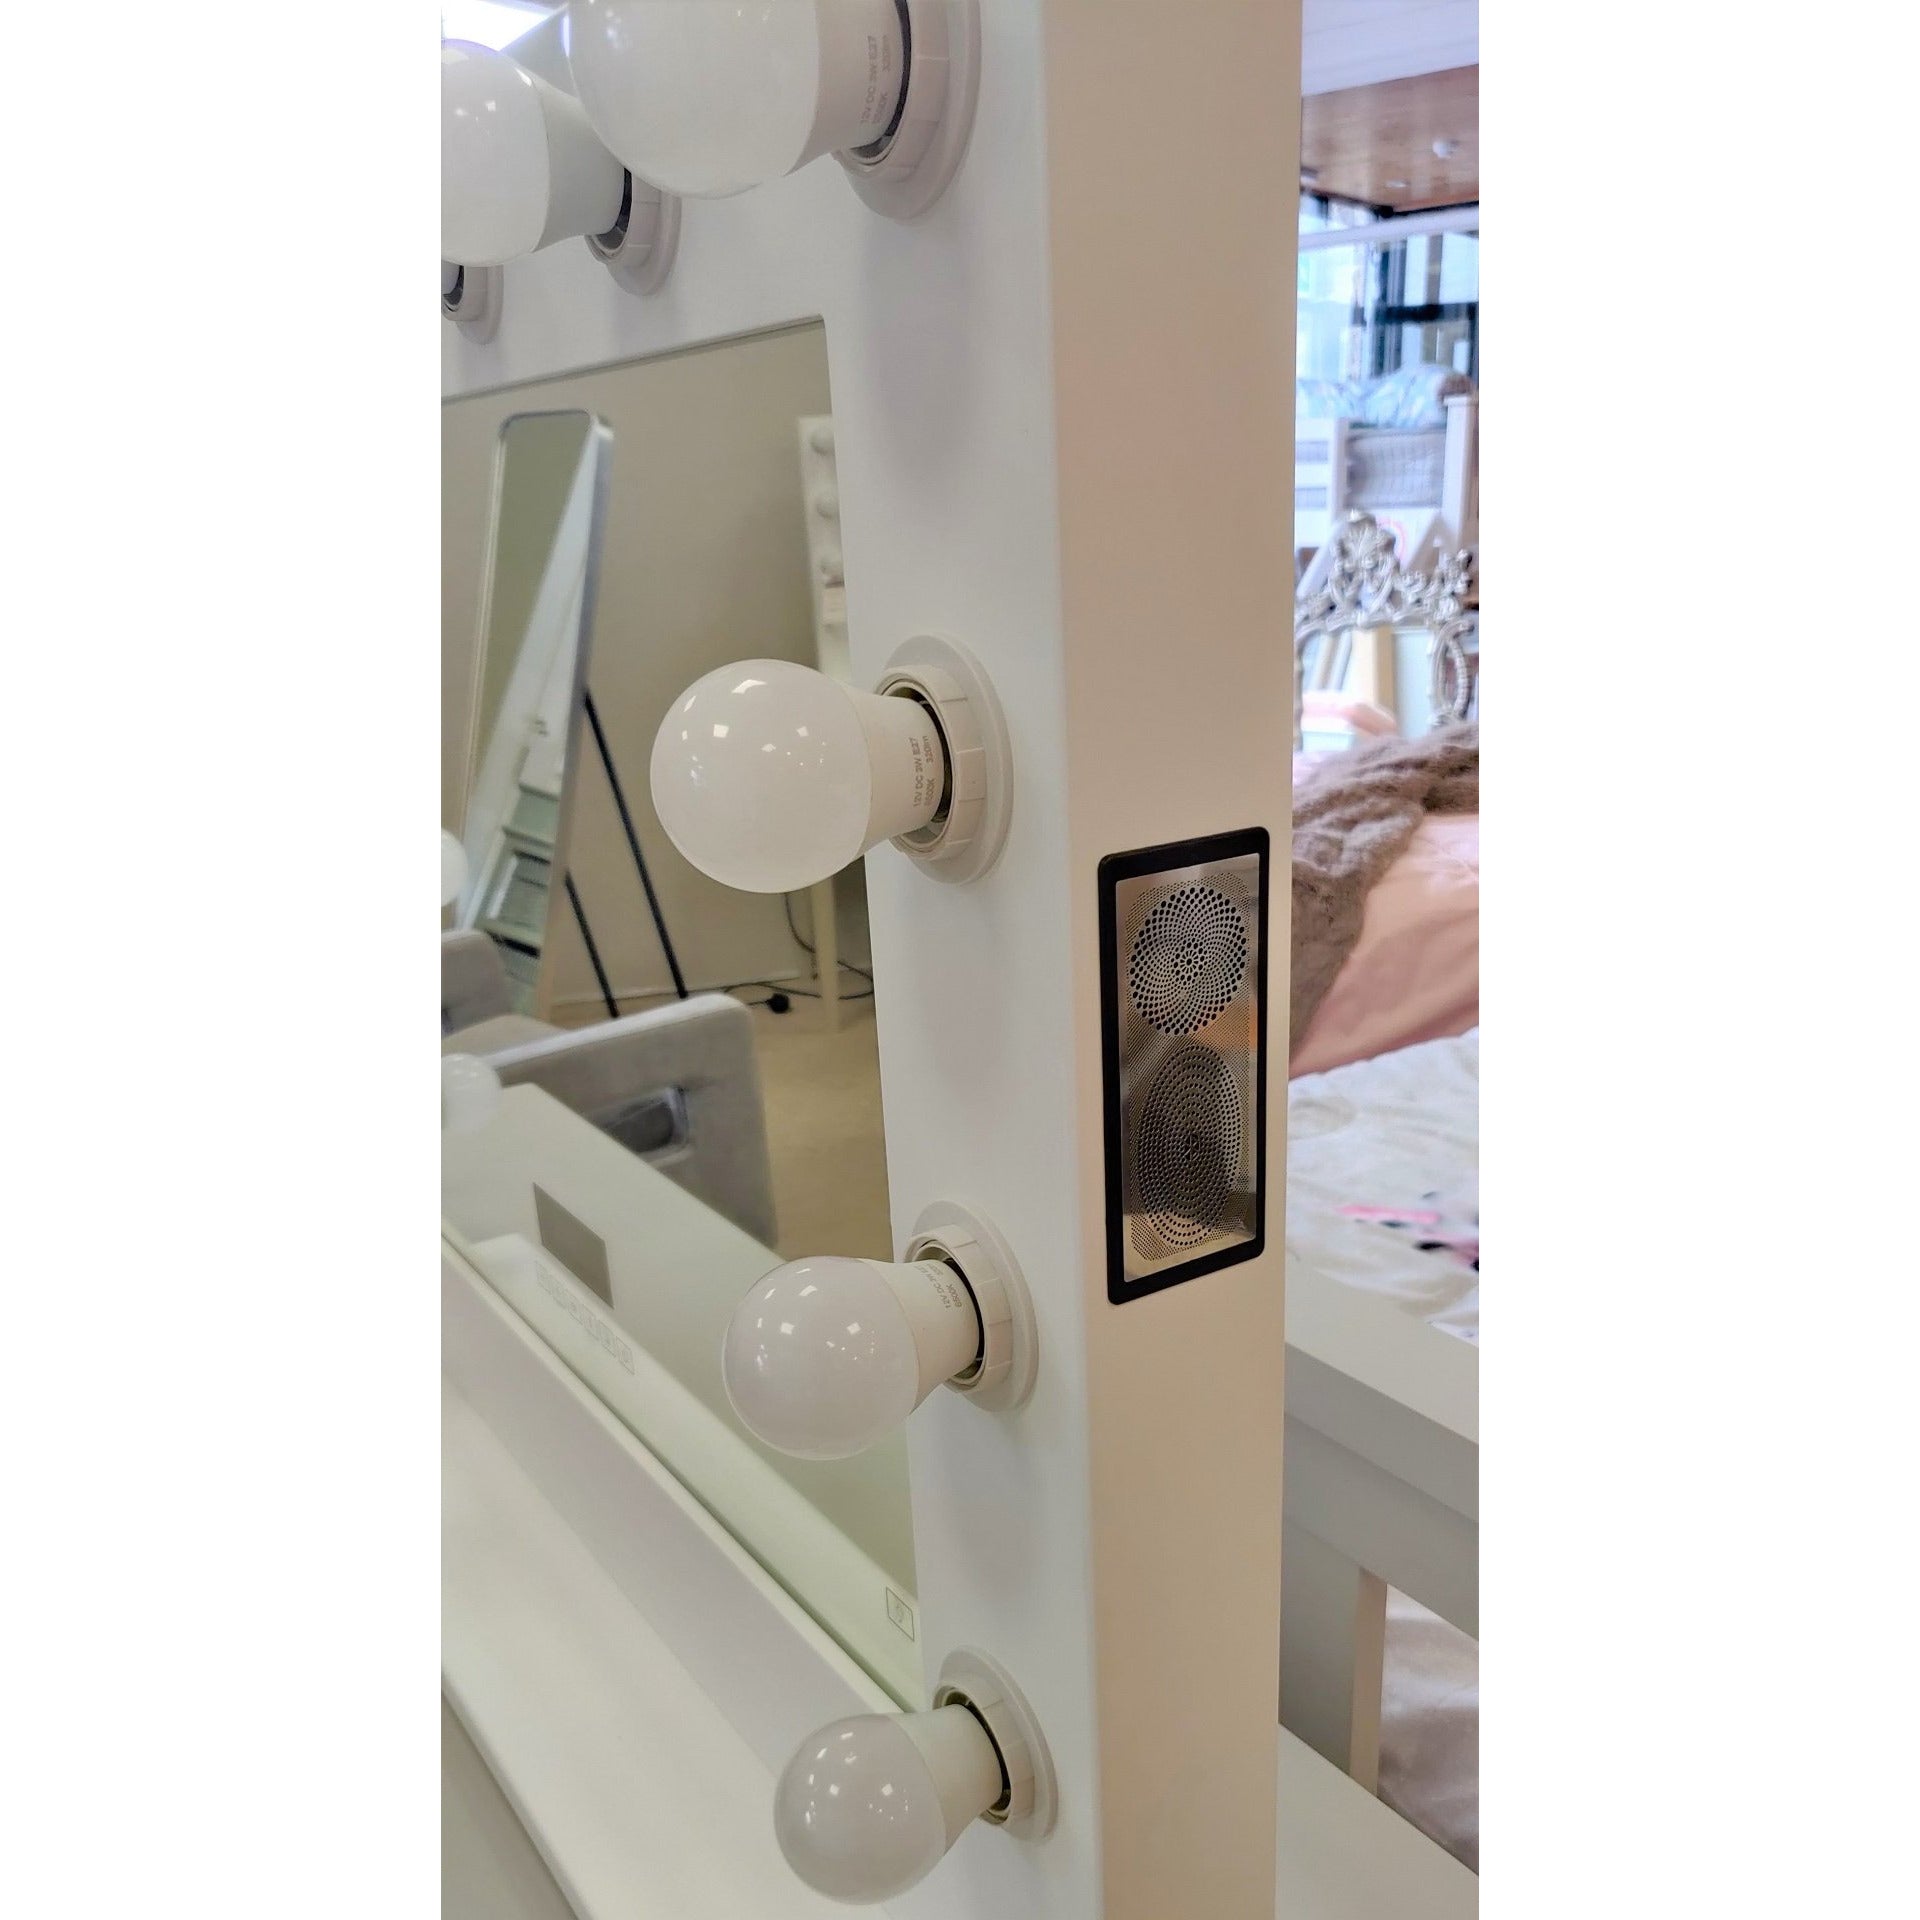 Hollywood Mirror - Bluetooth Model from Upstairs Downstairs Furniture in Lisburn, Monaghan and Enniskillen